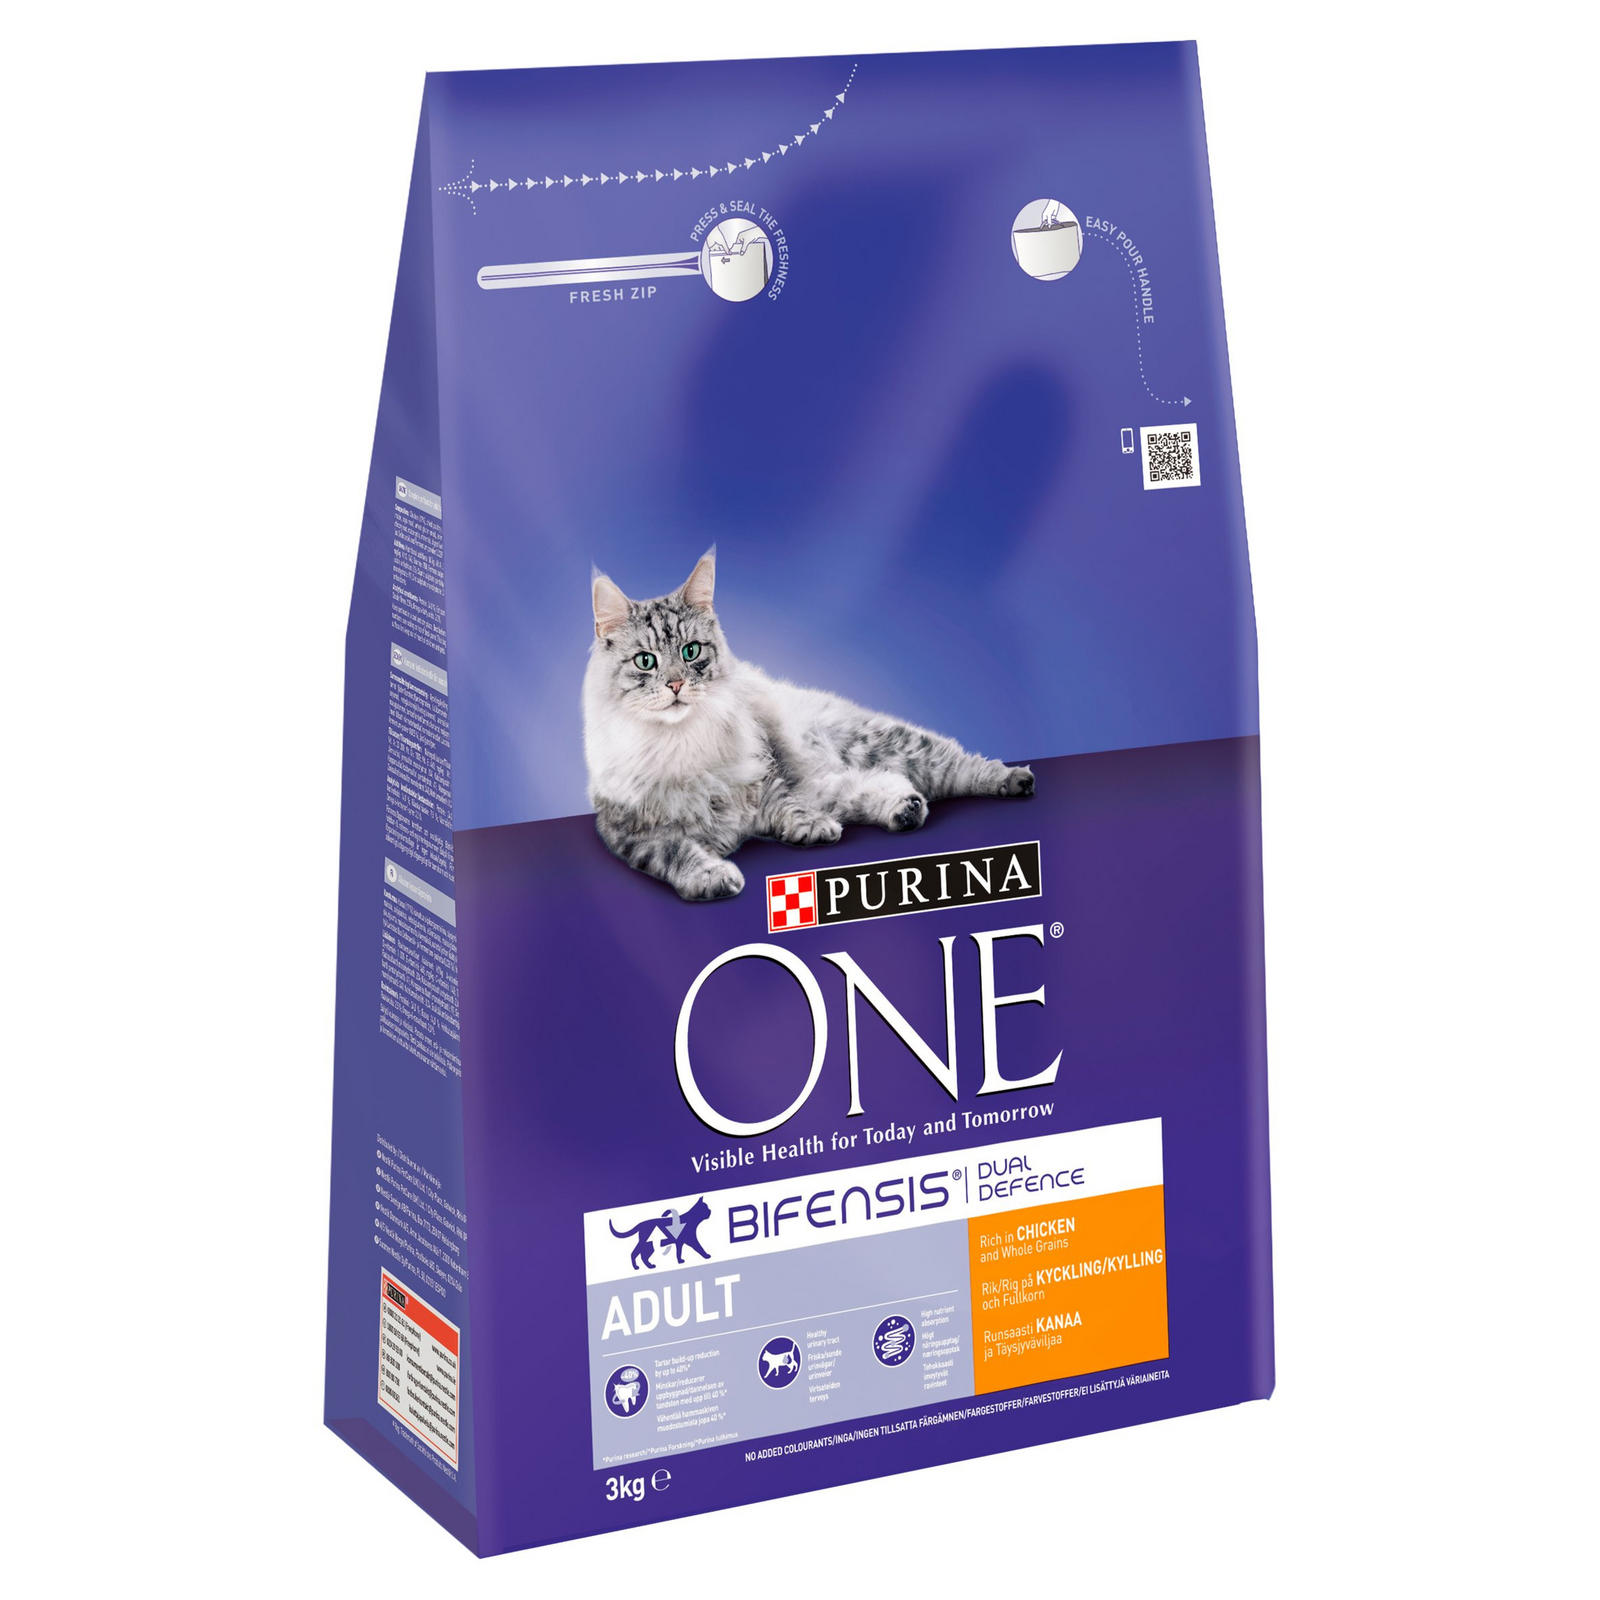 Purina ONE Adult Dry Cat Food Chicken and Wholegrains 3kg Pet Food